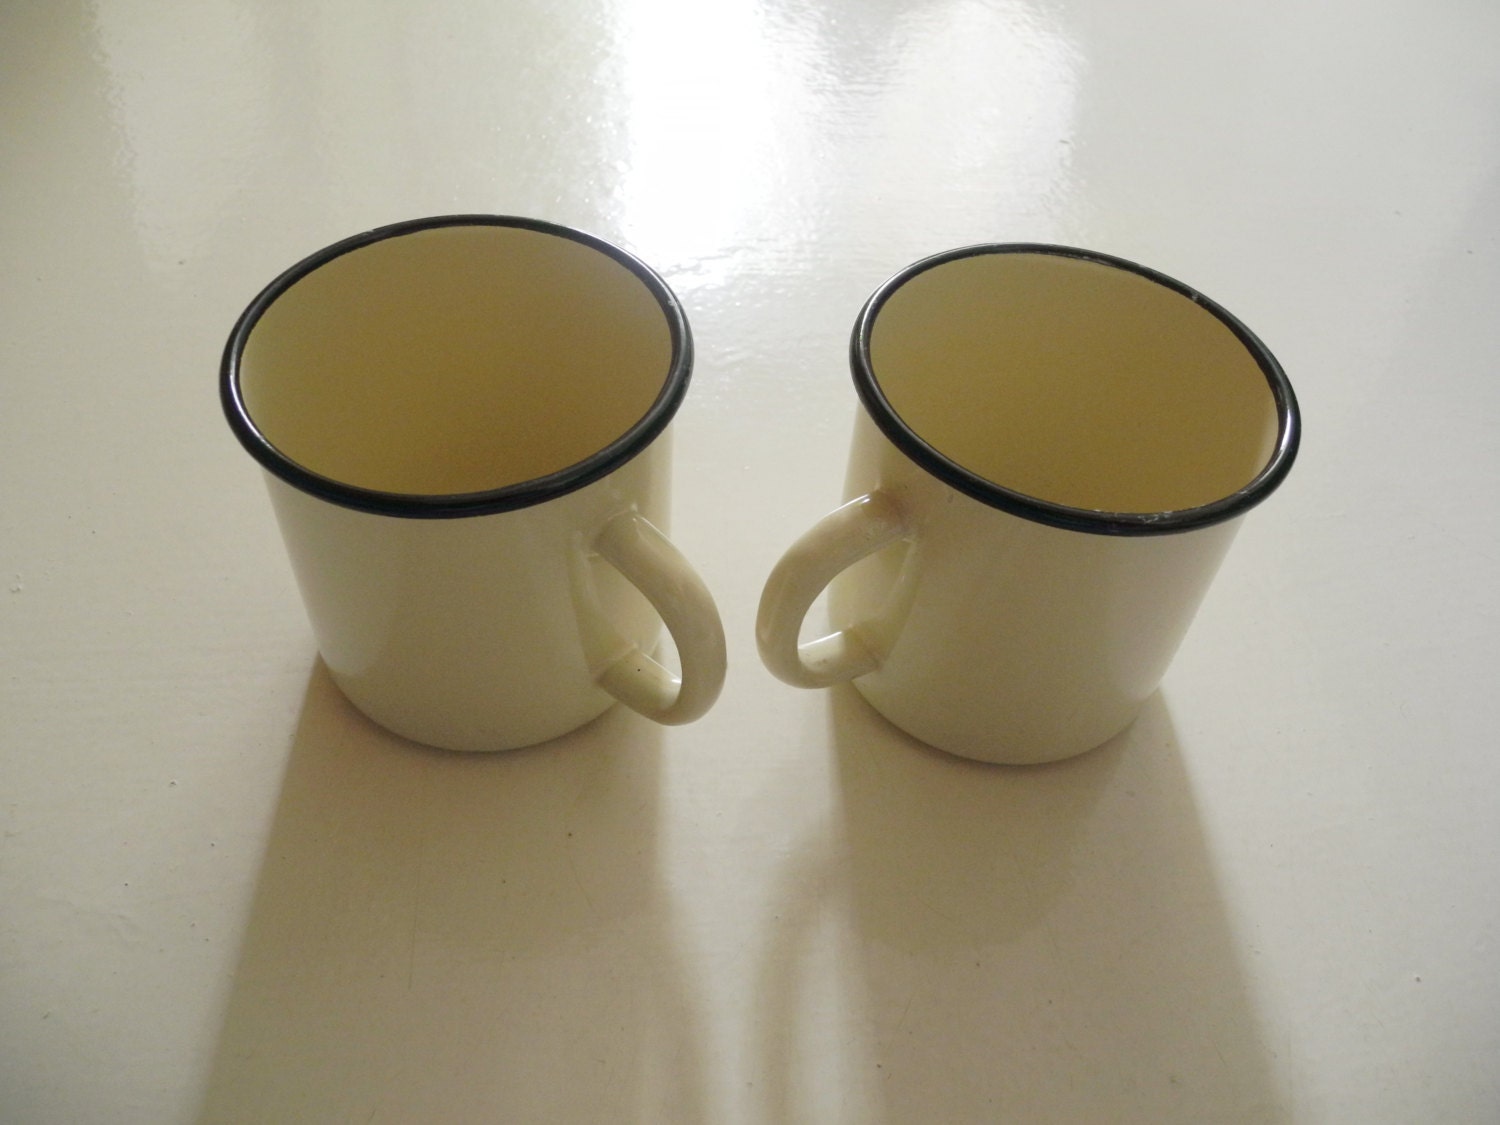 Vintage Soviet enamelware mug, cup  white  and black from USSR    set of 2 pieces